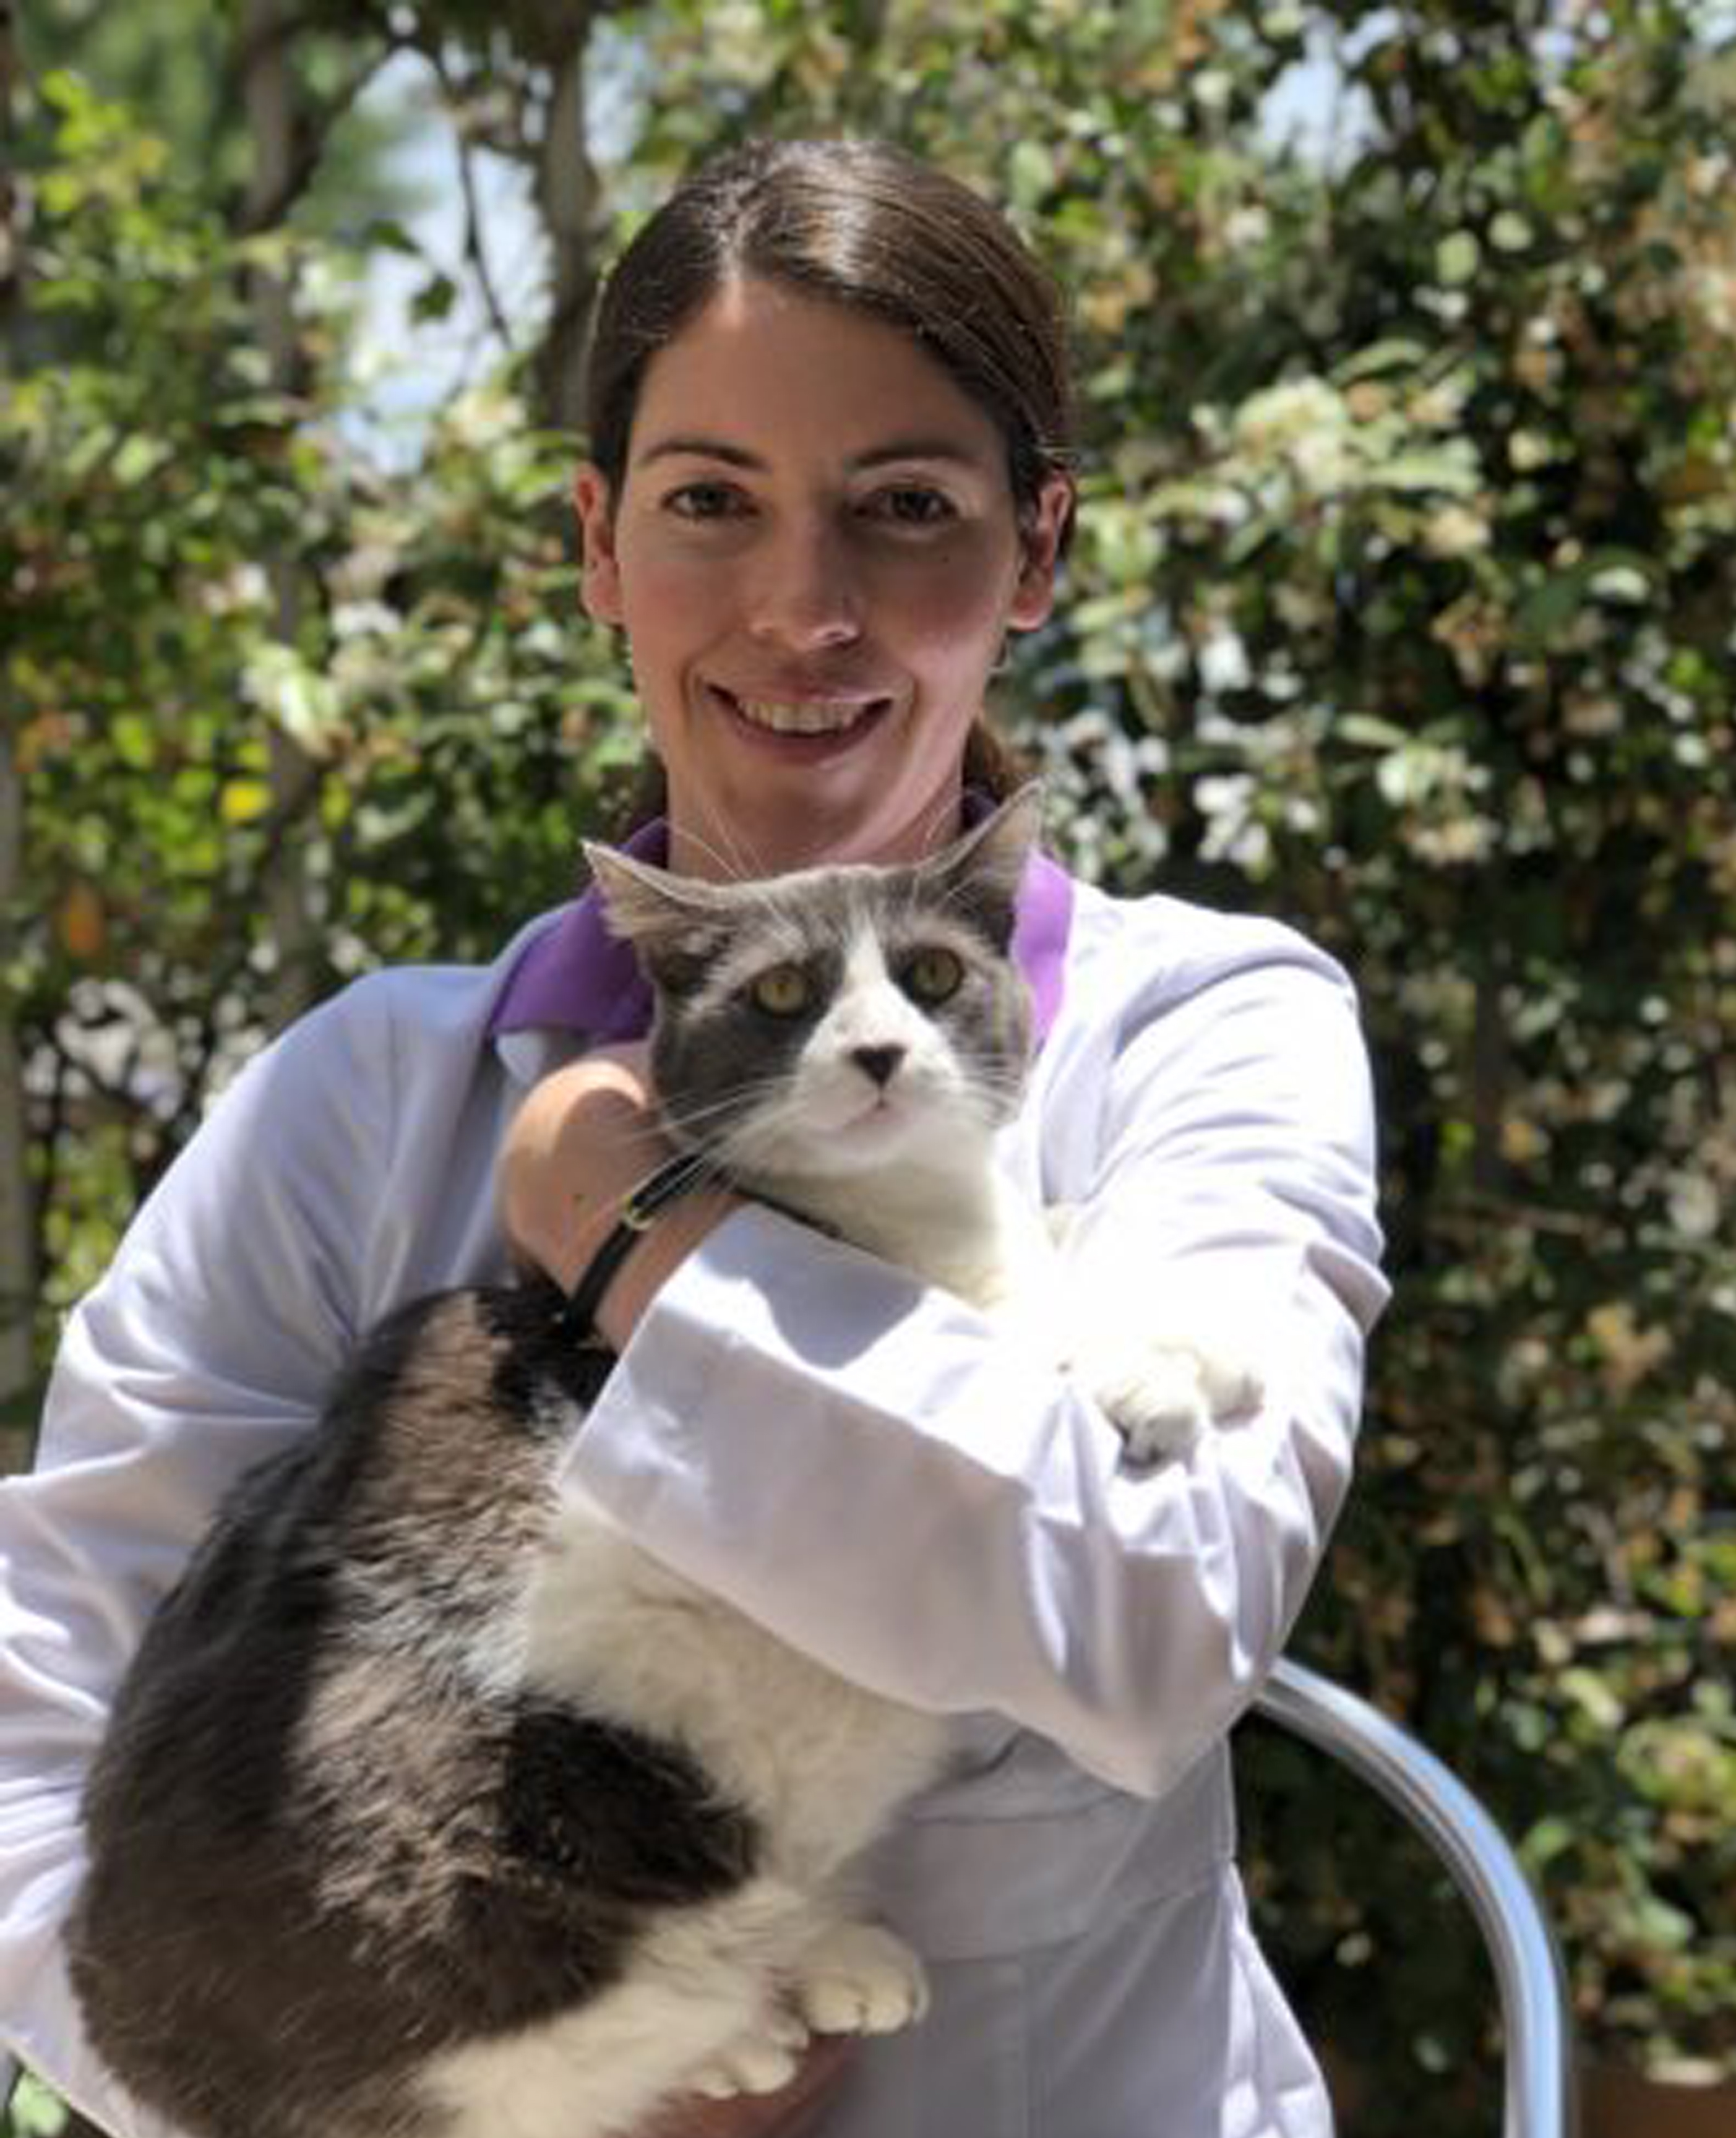 Dr. Lucy Cohen, a female veterinarian with her long, brown hair pulled back, hugs a gray and white cat and smiles at the camera.